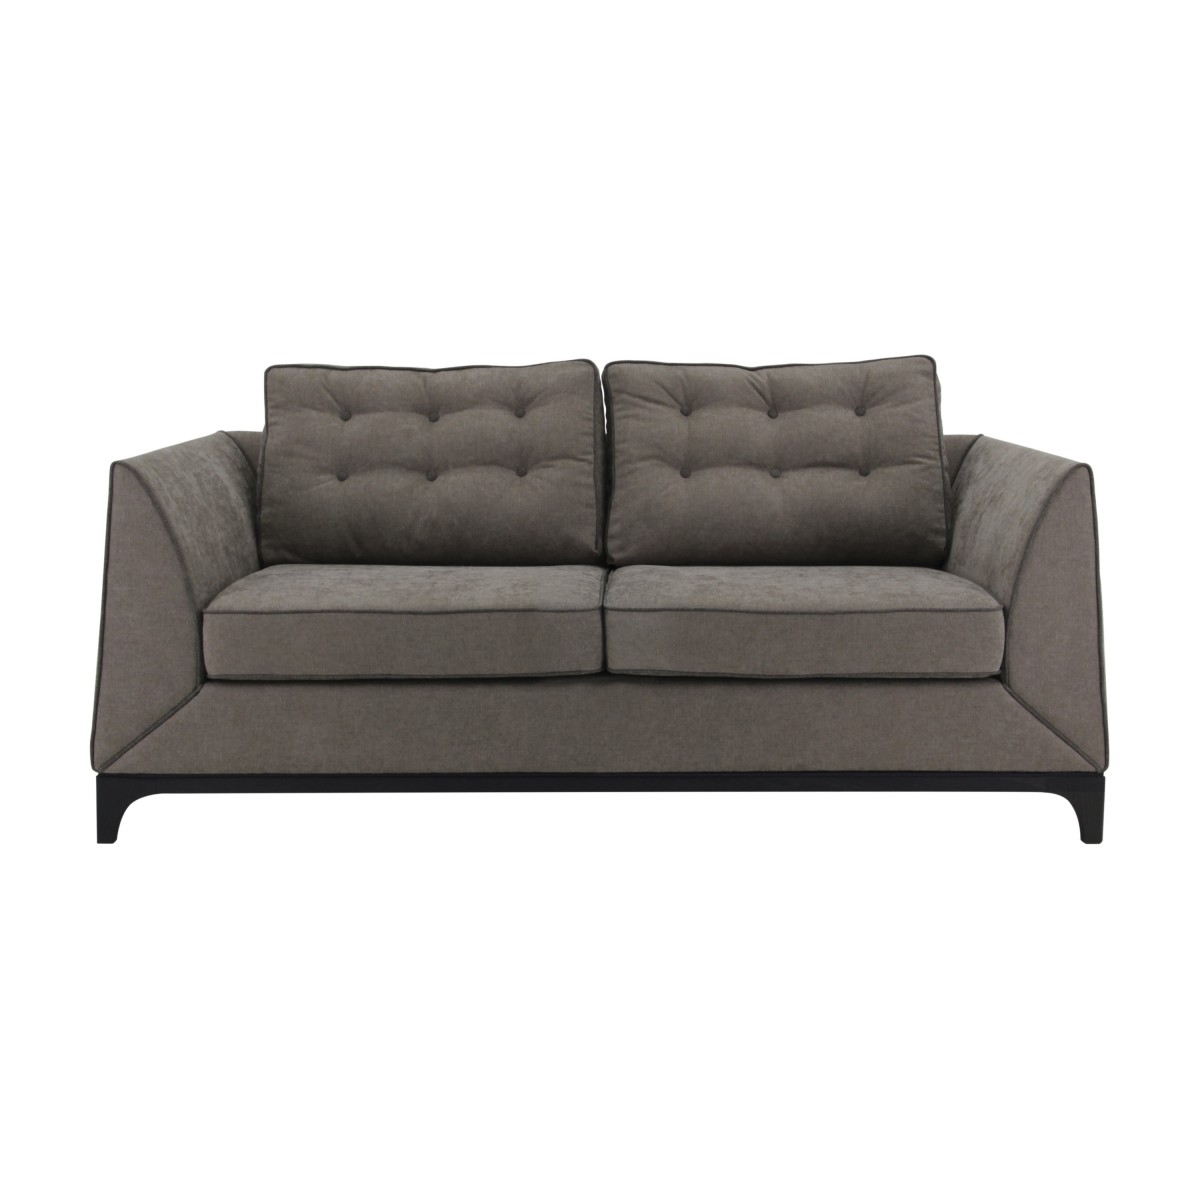 contemporary style 3 seater sofa